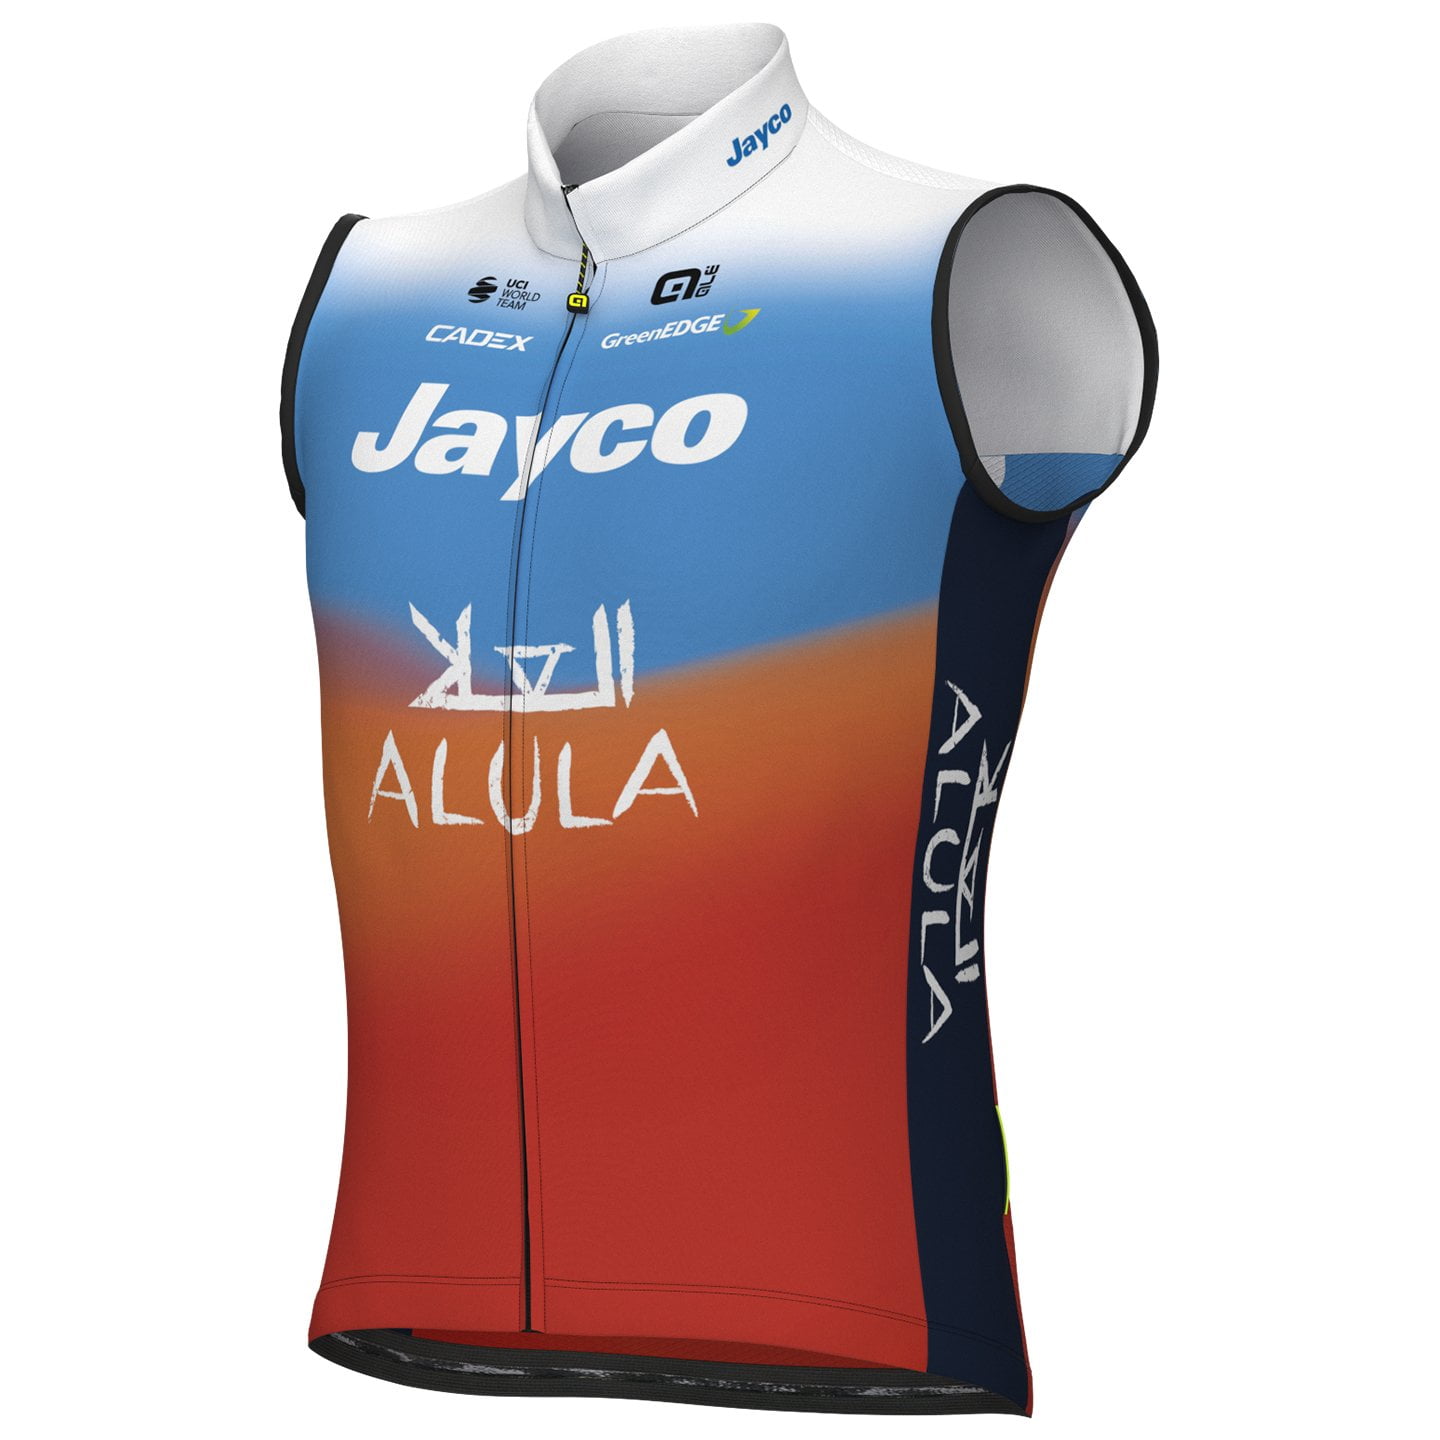 TEAM JAYCO-ALULA 2024 Wind Vest, for men, size S, Cycling vest, Cycling clothing